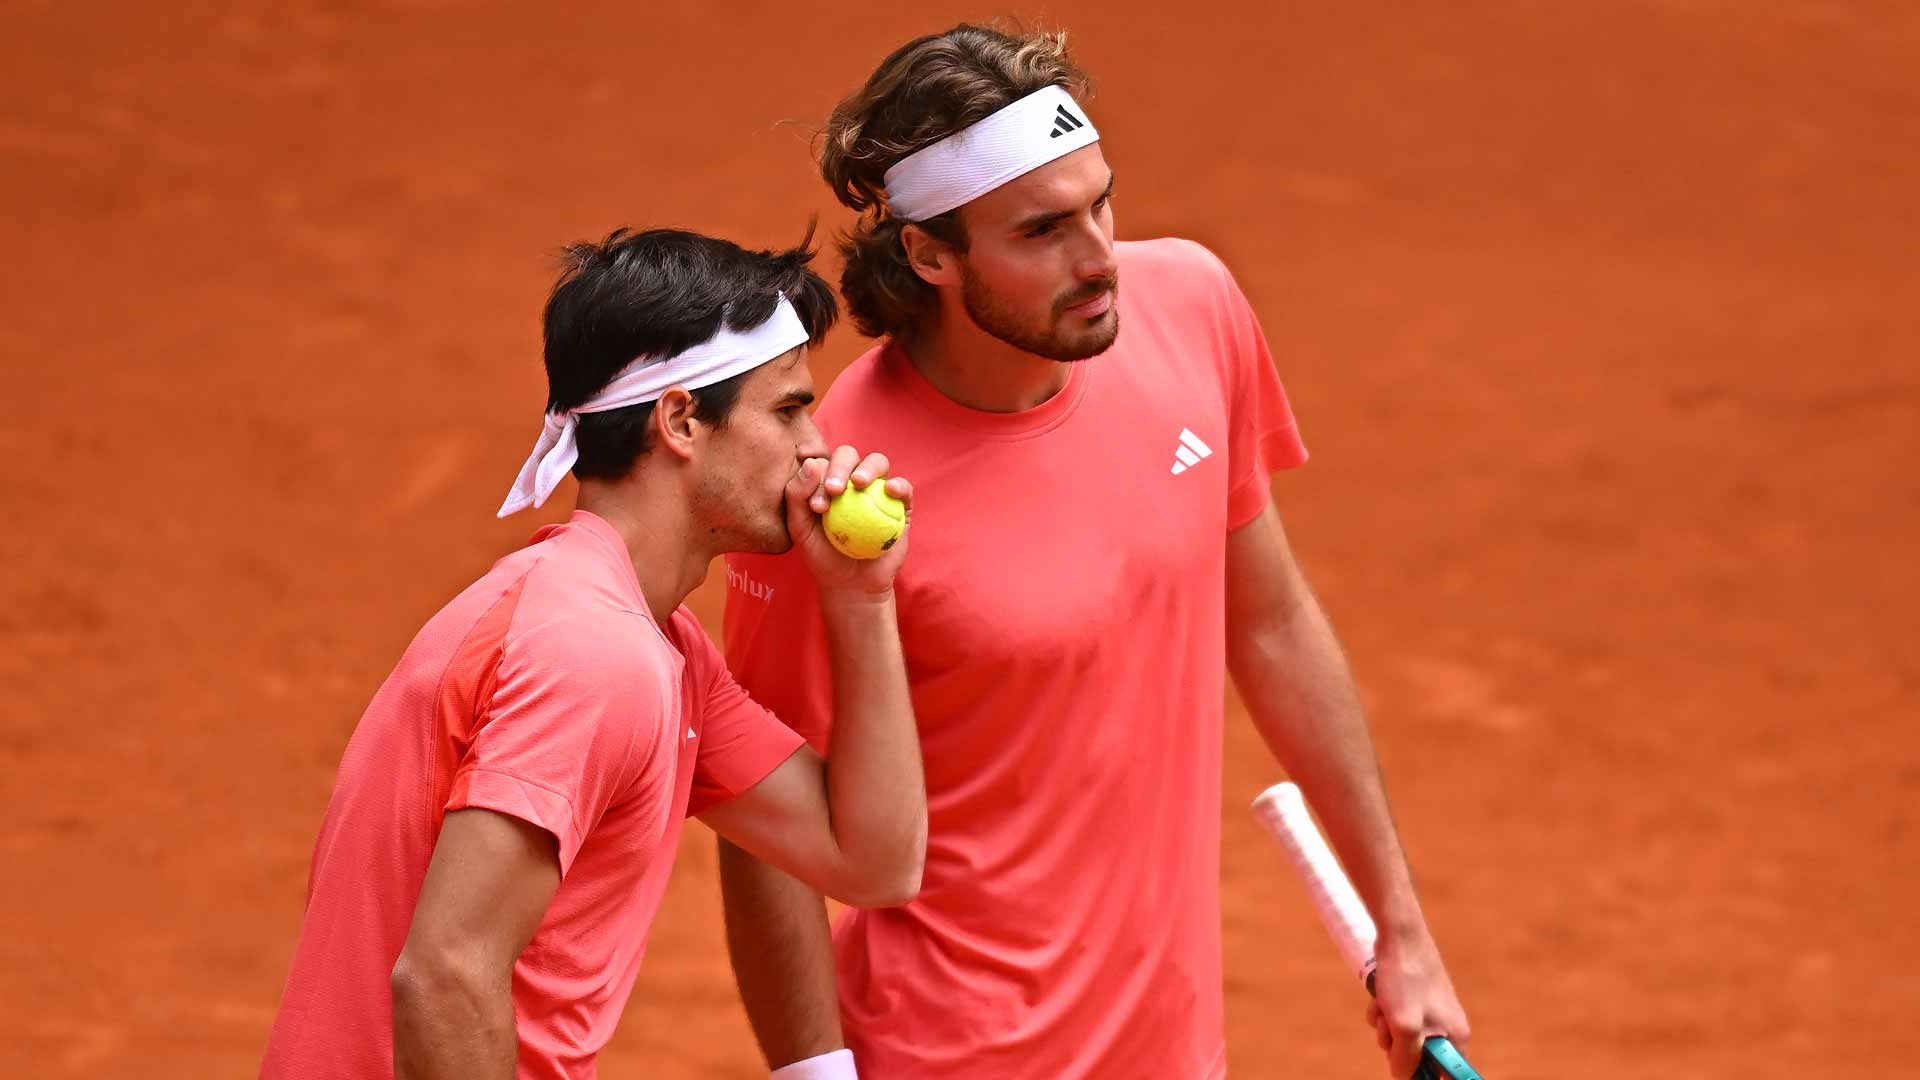 Petros Tsitsipas and Stefanos Tsitsipas will compete together for the sixth time this year.